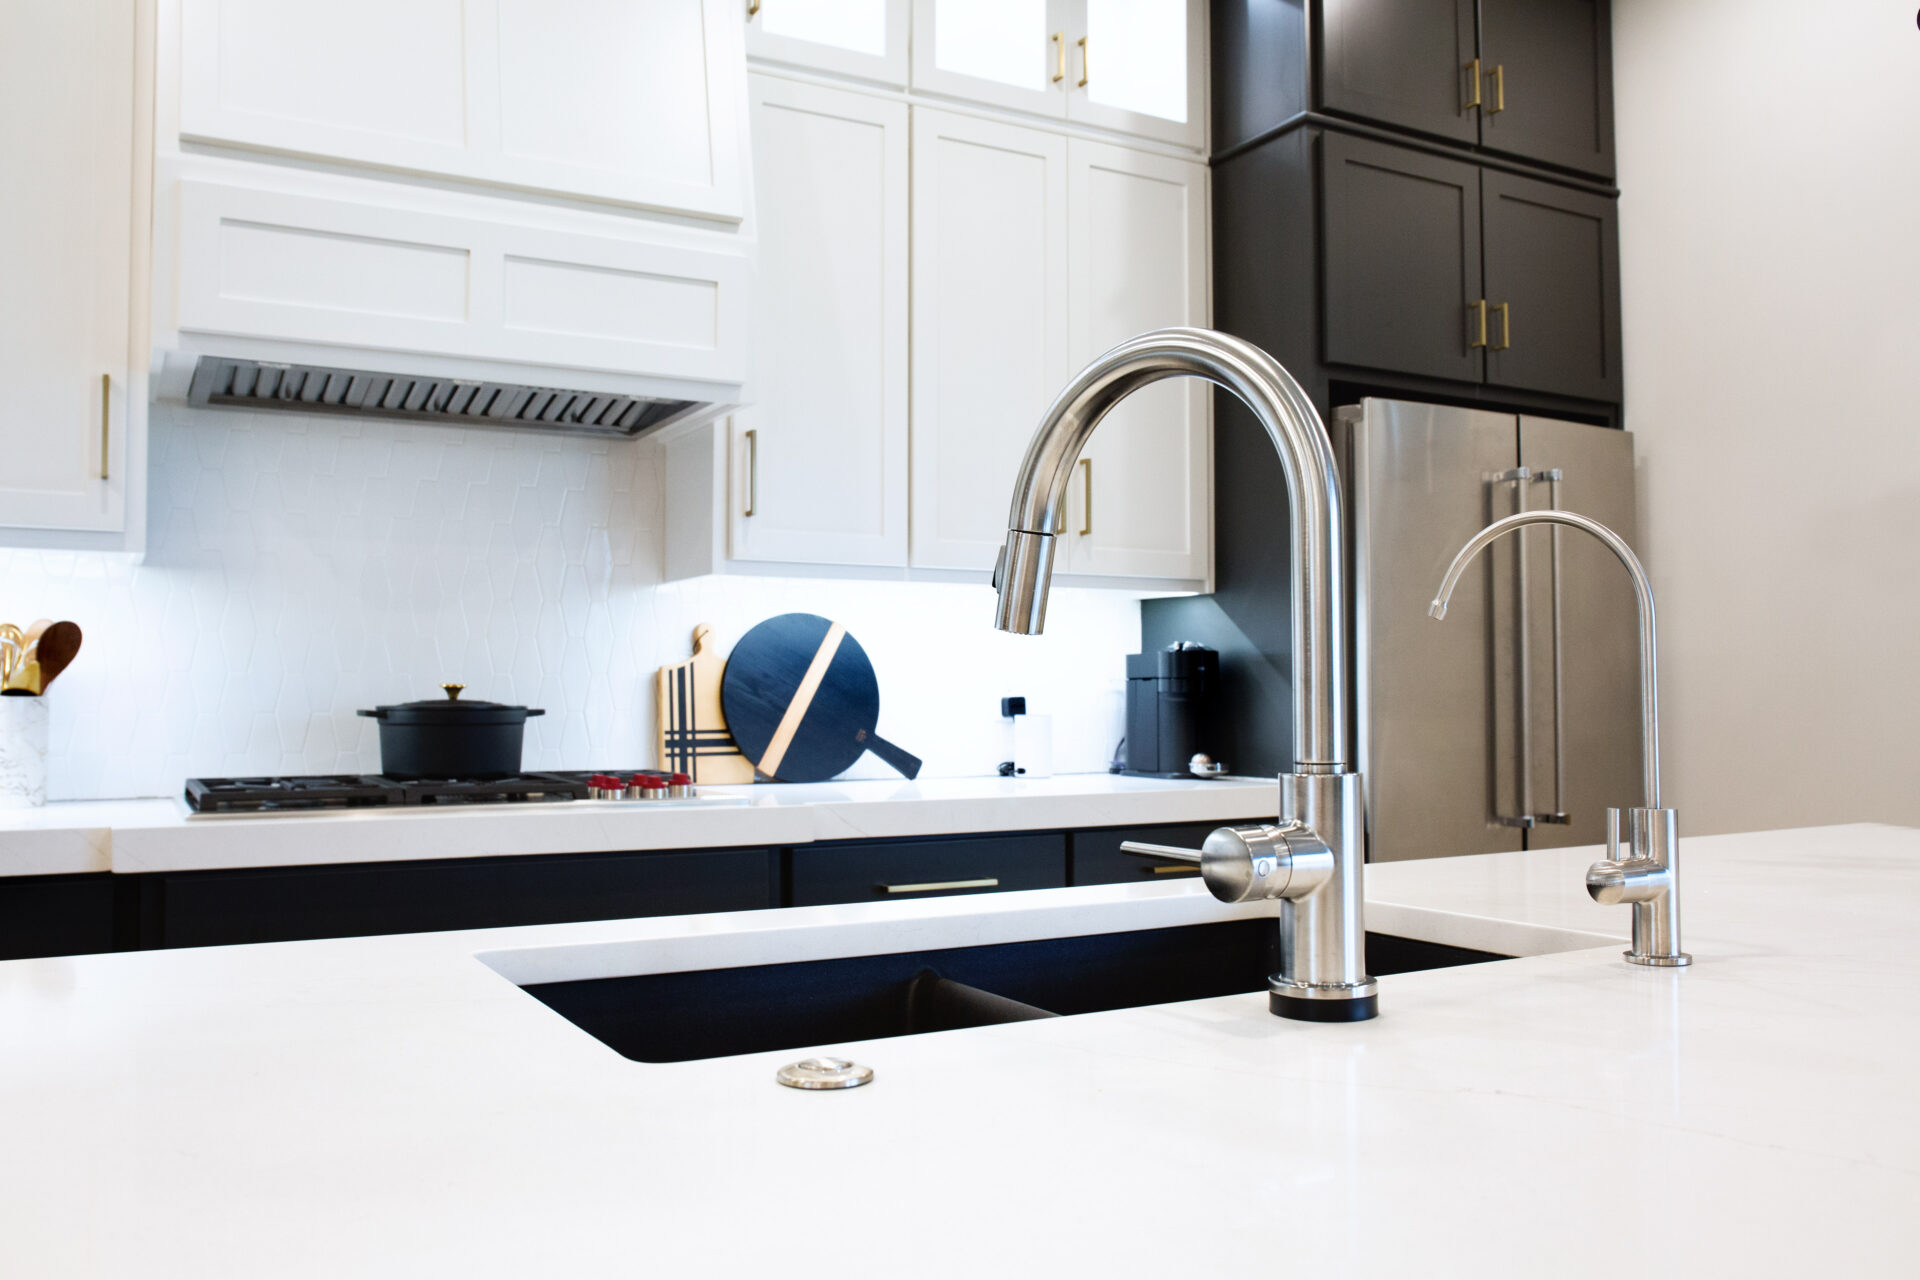 Close-up photos of a kitchen faucet and sink